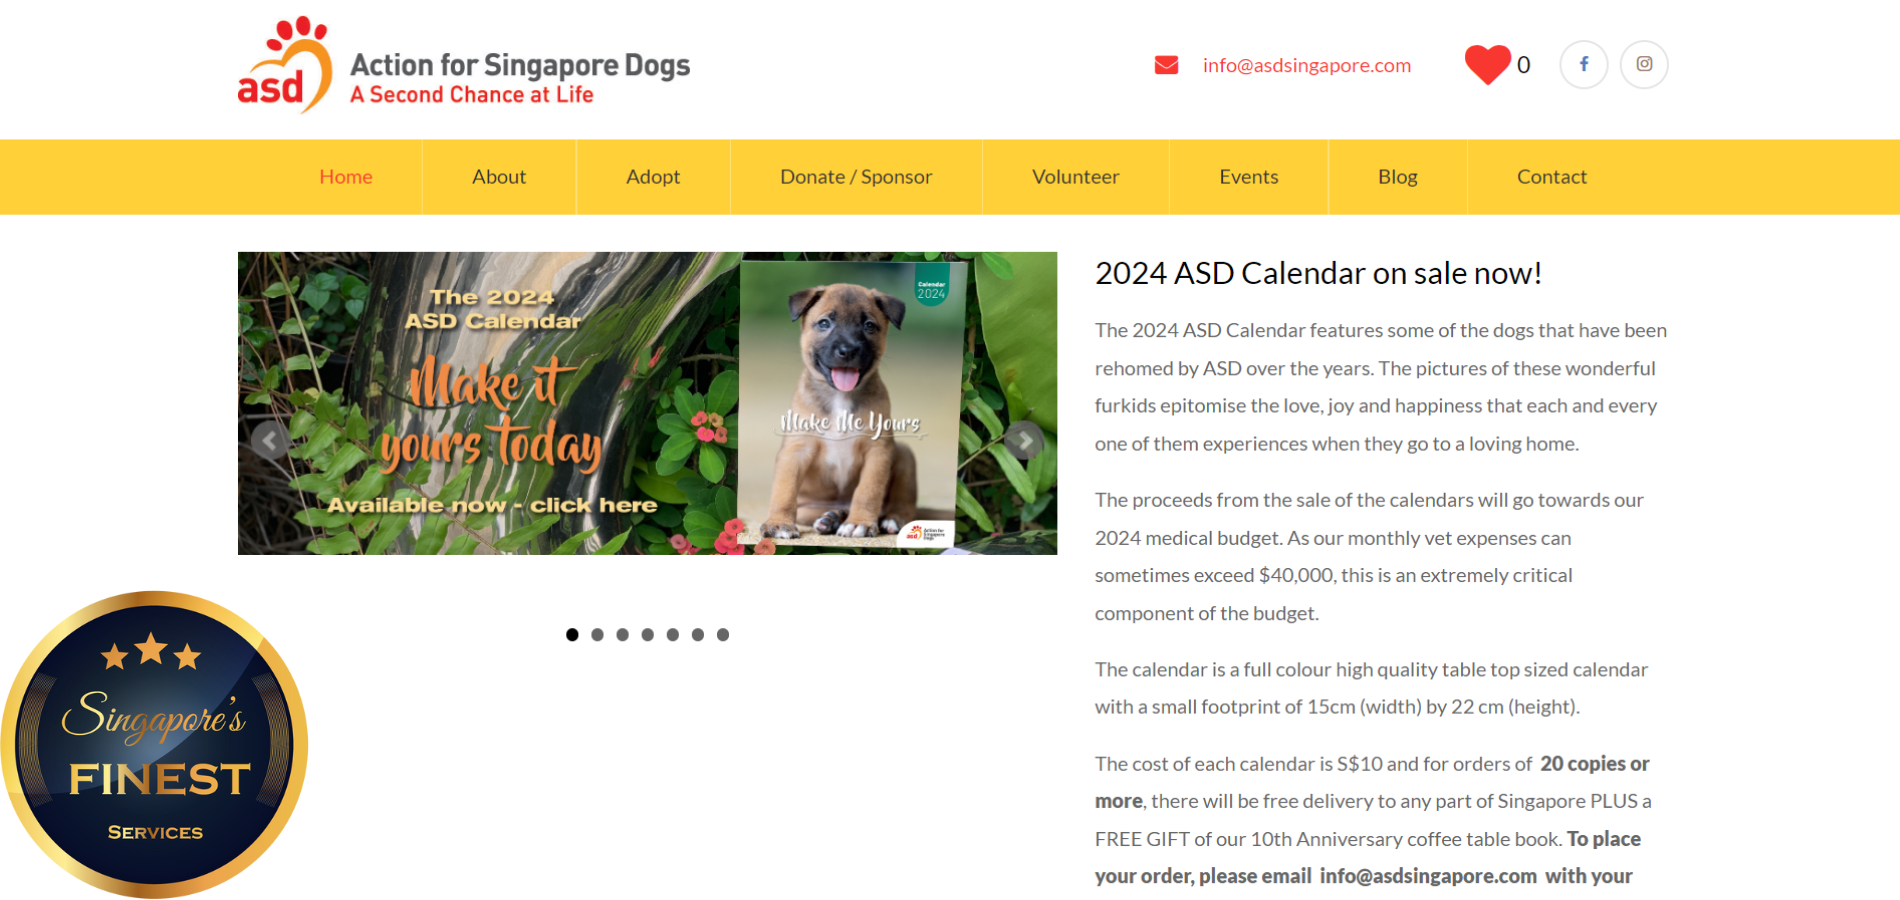 The Finest Pet Adoption Centers in Singapore